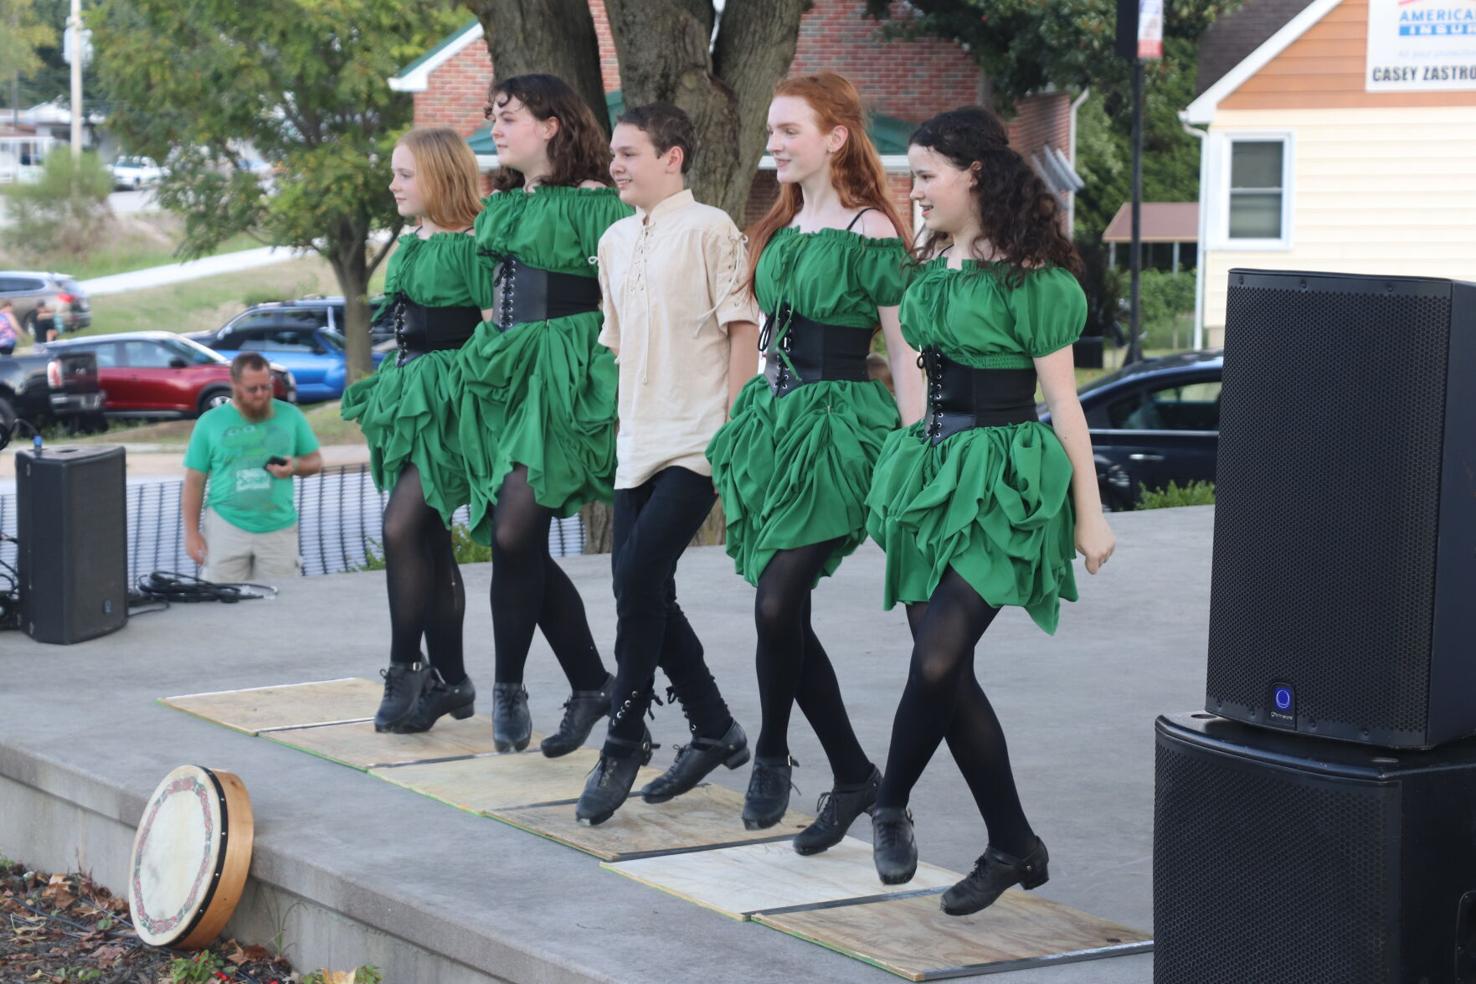 IN PHOTOS The 2022 VFW Celtic Festival brings Irish and Scottish flair